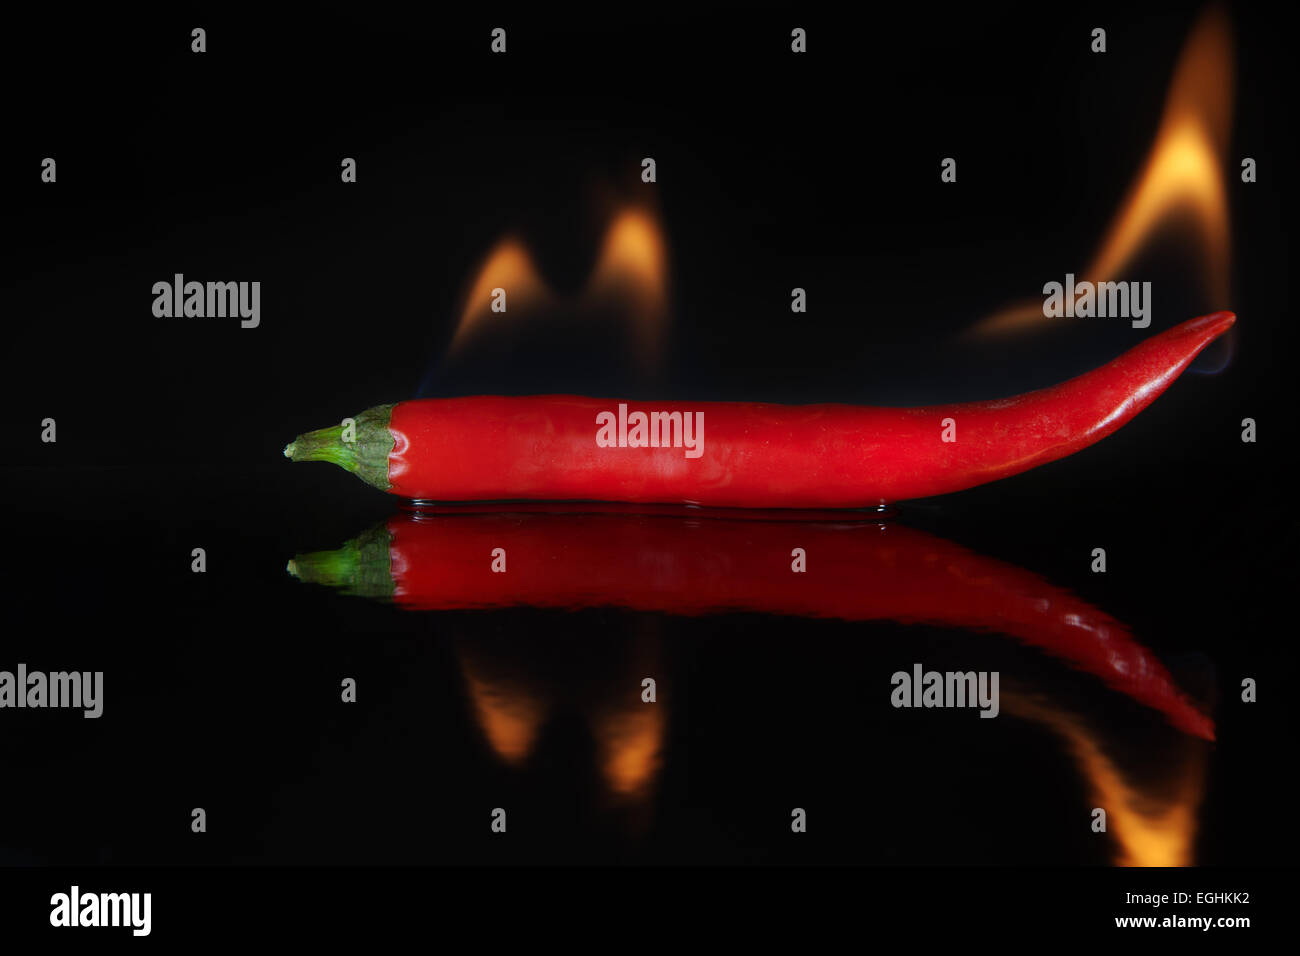 Hot chili pepper, with flames Stock Photo